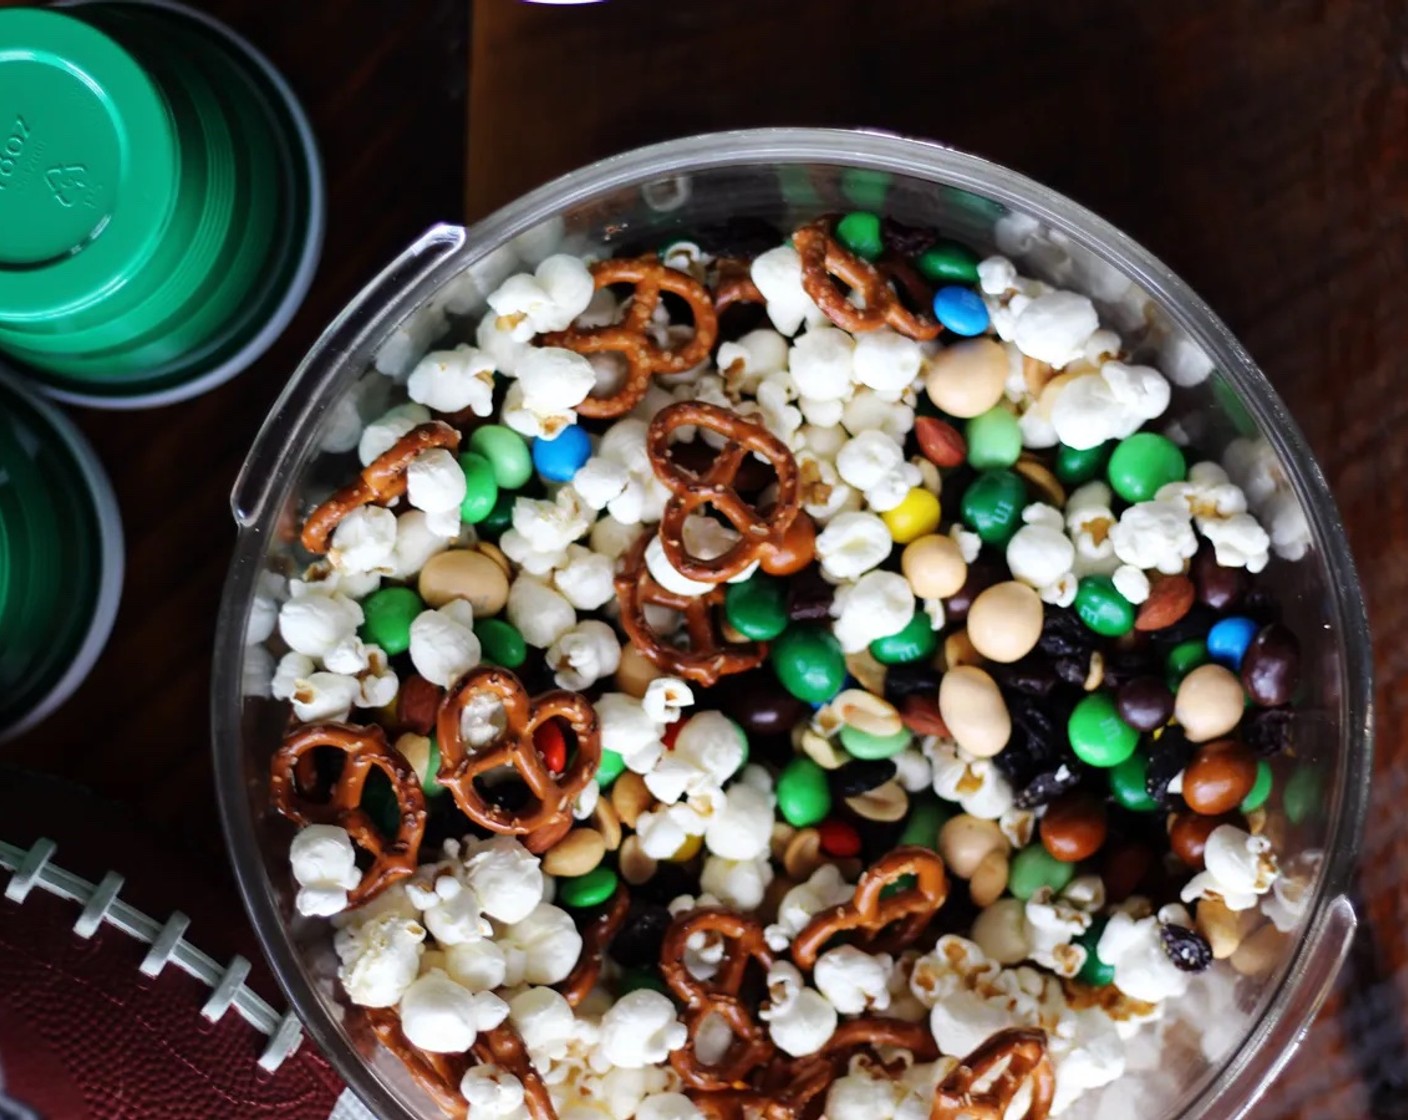 Gridiron Gameday Party Mix for the Big Game